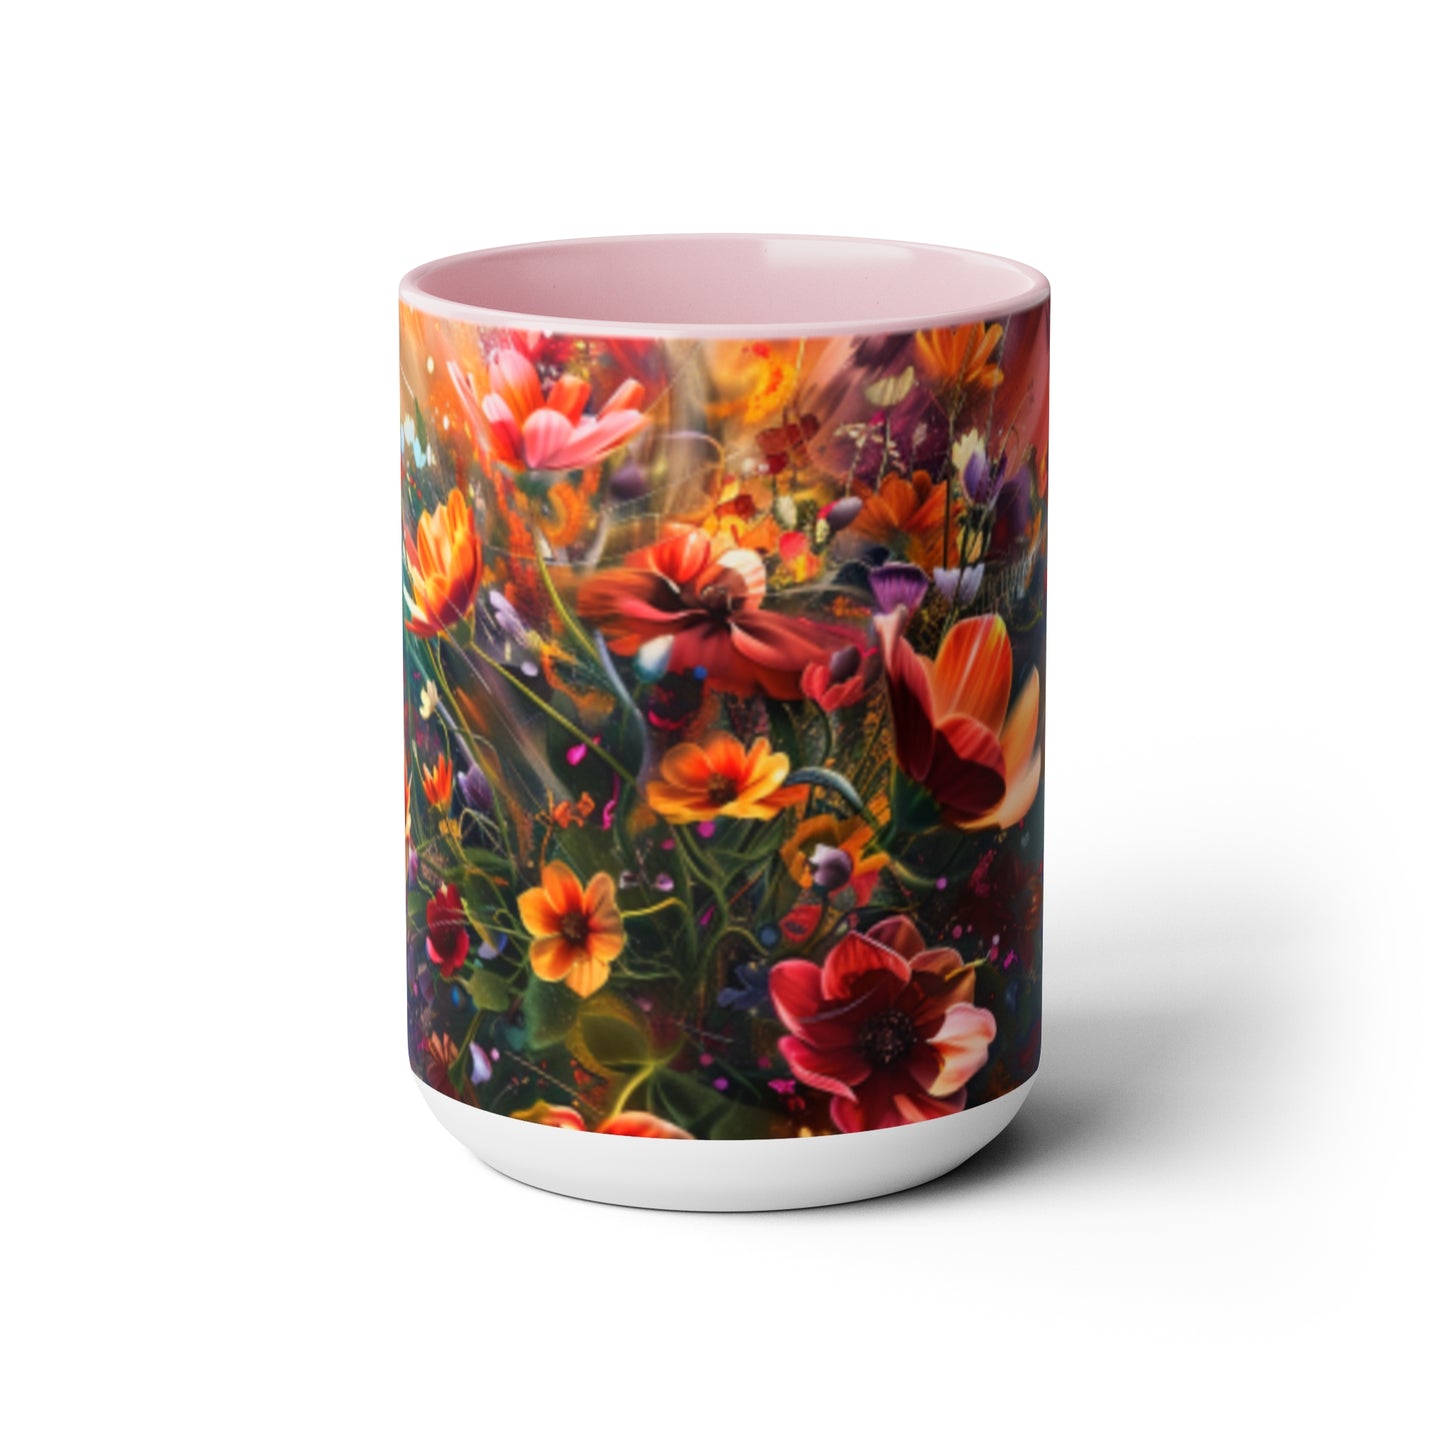 Mothers Day Two-Tone Coffee Mugs, 15oz